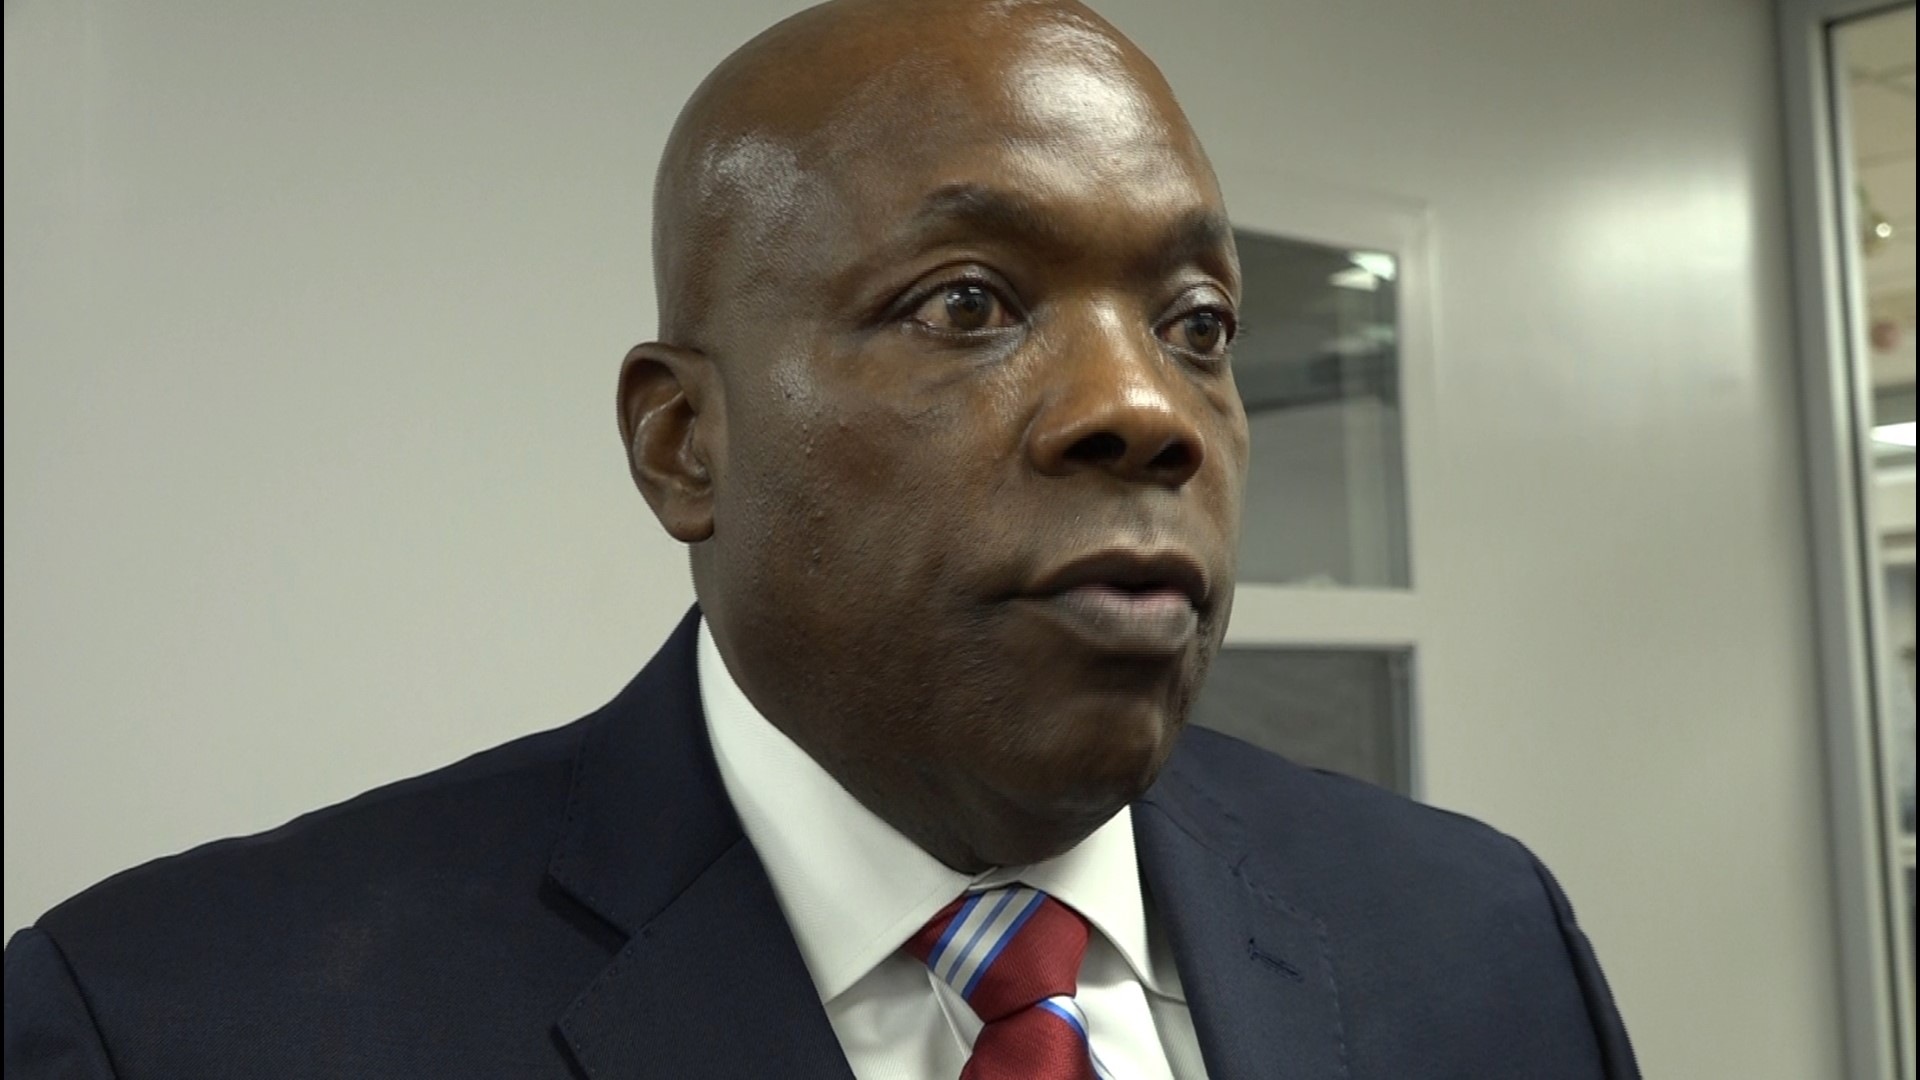 The CEO of Jacksonville Housing Authority, Dwayne Alexander, says he will not resign amid multiple probes into the agency by the city's office of inspector general.